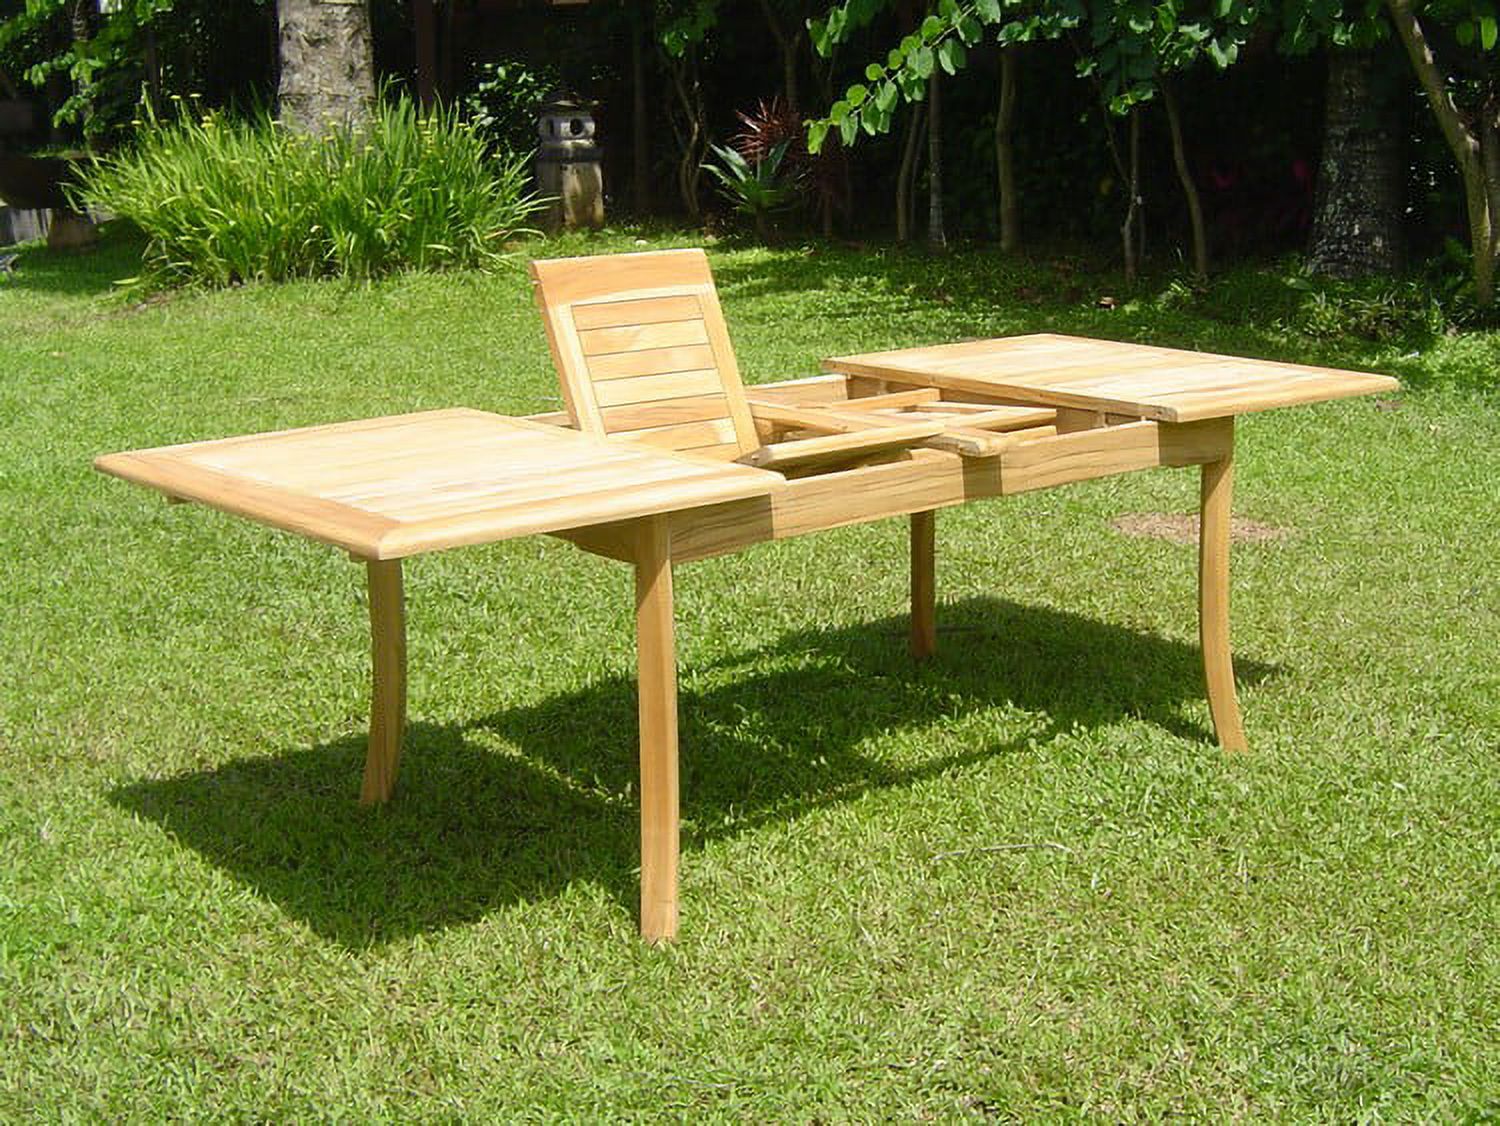 Teak Dining Set:8 Seater 9 Pc - 94" Rectangle Table And 8 Marley Reclining Arm Chairs Outdoor Patio Grade-A Teak Wood WholesaleTeak #WMDSMRc - image 2 of 3